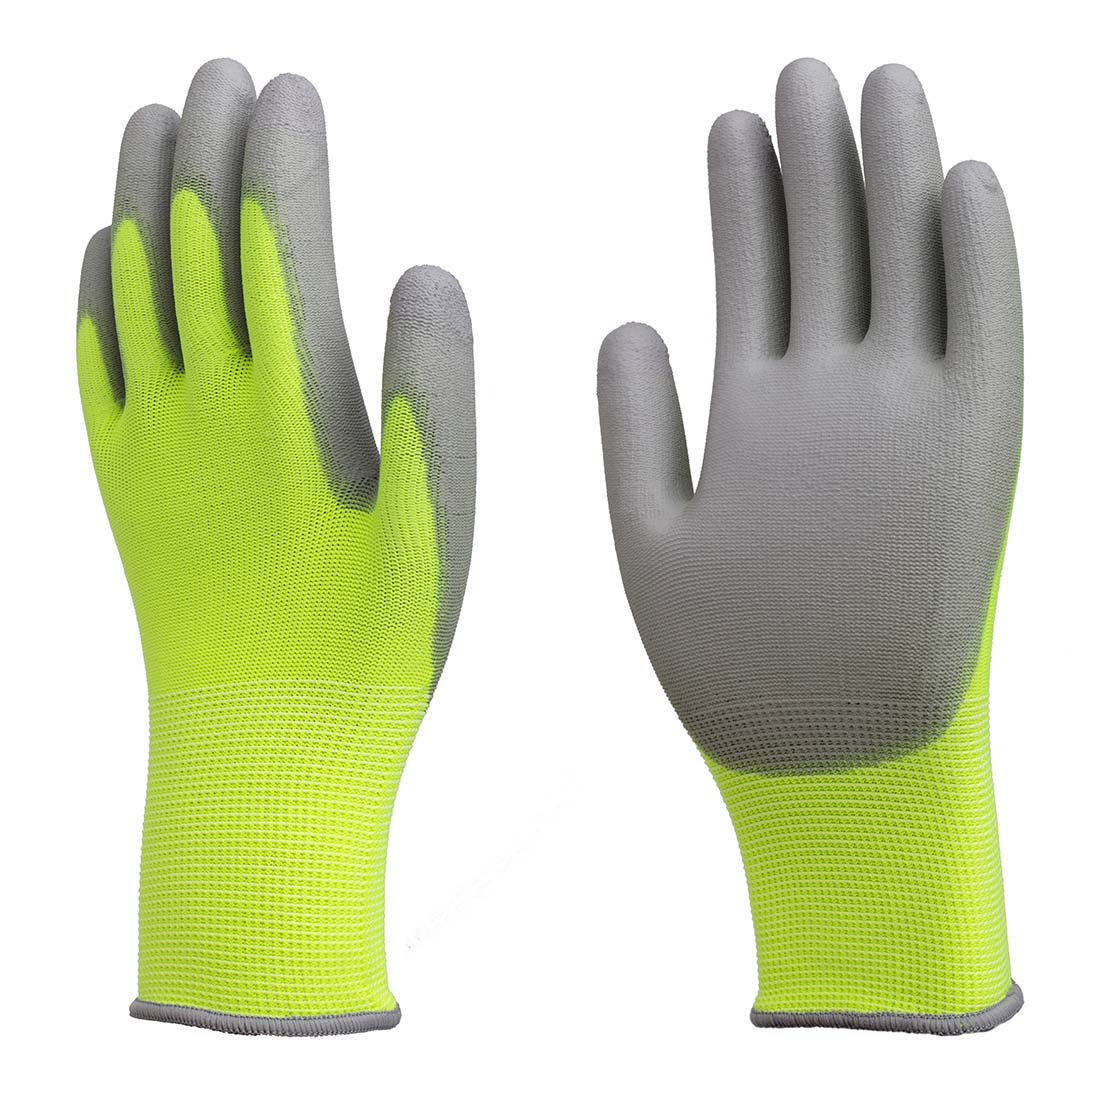 13G polyester glove PU palm coated